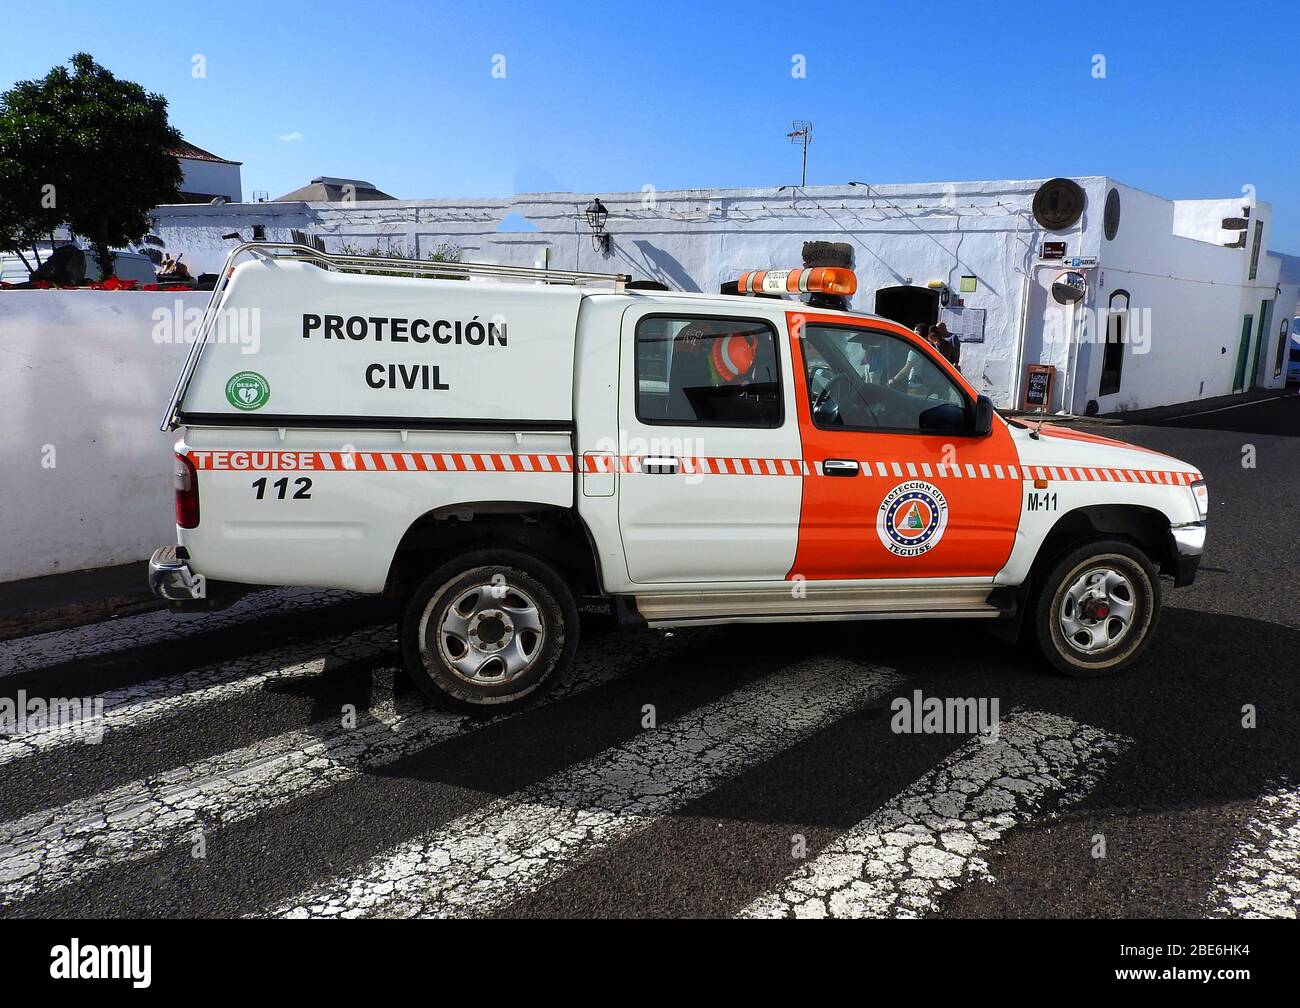 Teguise civil defence TOYOTA vehicle on the island of Lanzarote,canary Islands, Spain,- January 2020. Civil protection or civil defense in Spain began  on August 12, 1949 , via Protocol 1 additional to the Geneva Treaty to be involved with the  'Protection of victims of international armed conflicts', and to complement the work of the Red Cross. Today they are involved in everything from traffic management and rescues to local disasters. In this case they were blocking cars from parking in streets close to a regional market. The colour orange is also used by  rescue vehicles. Stock Photo